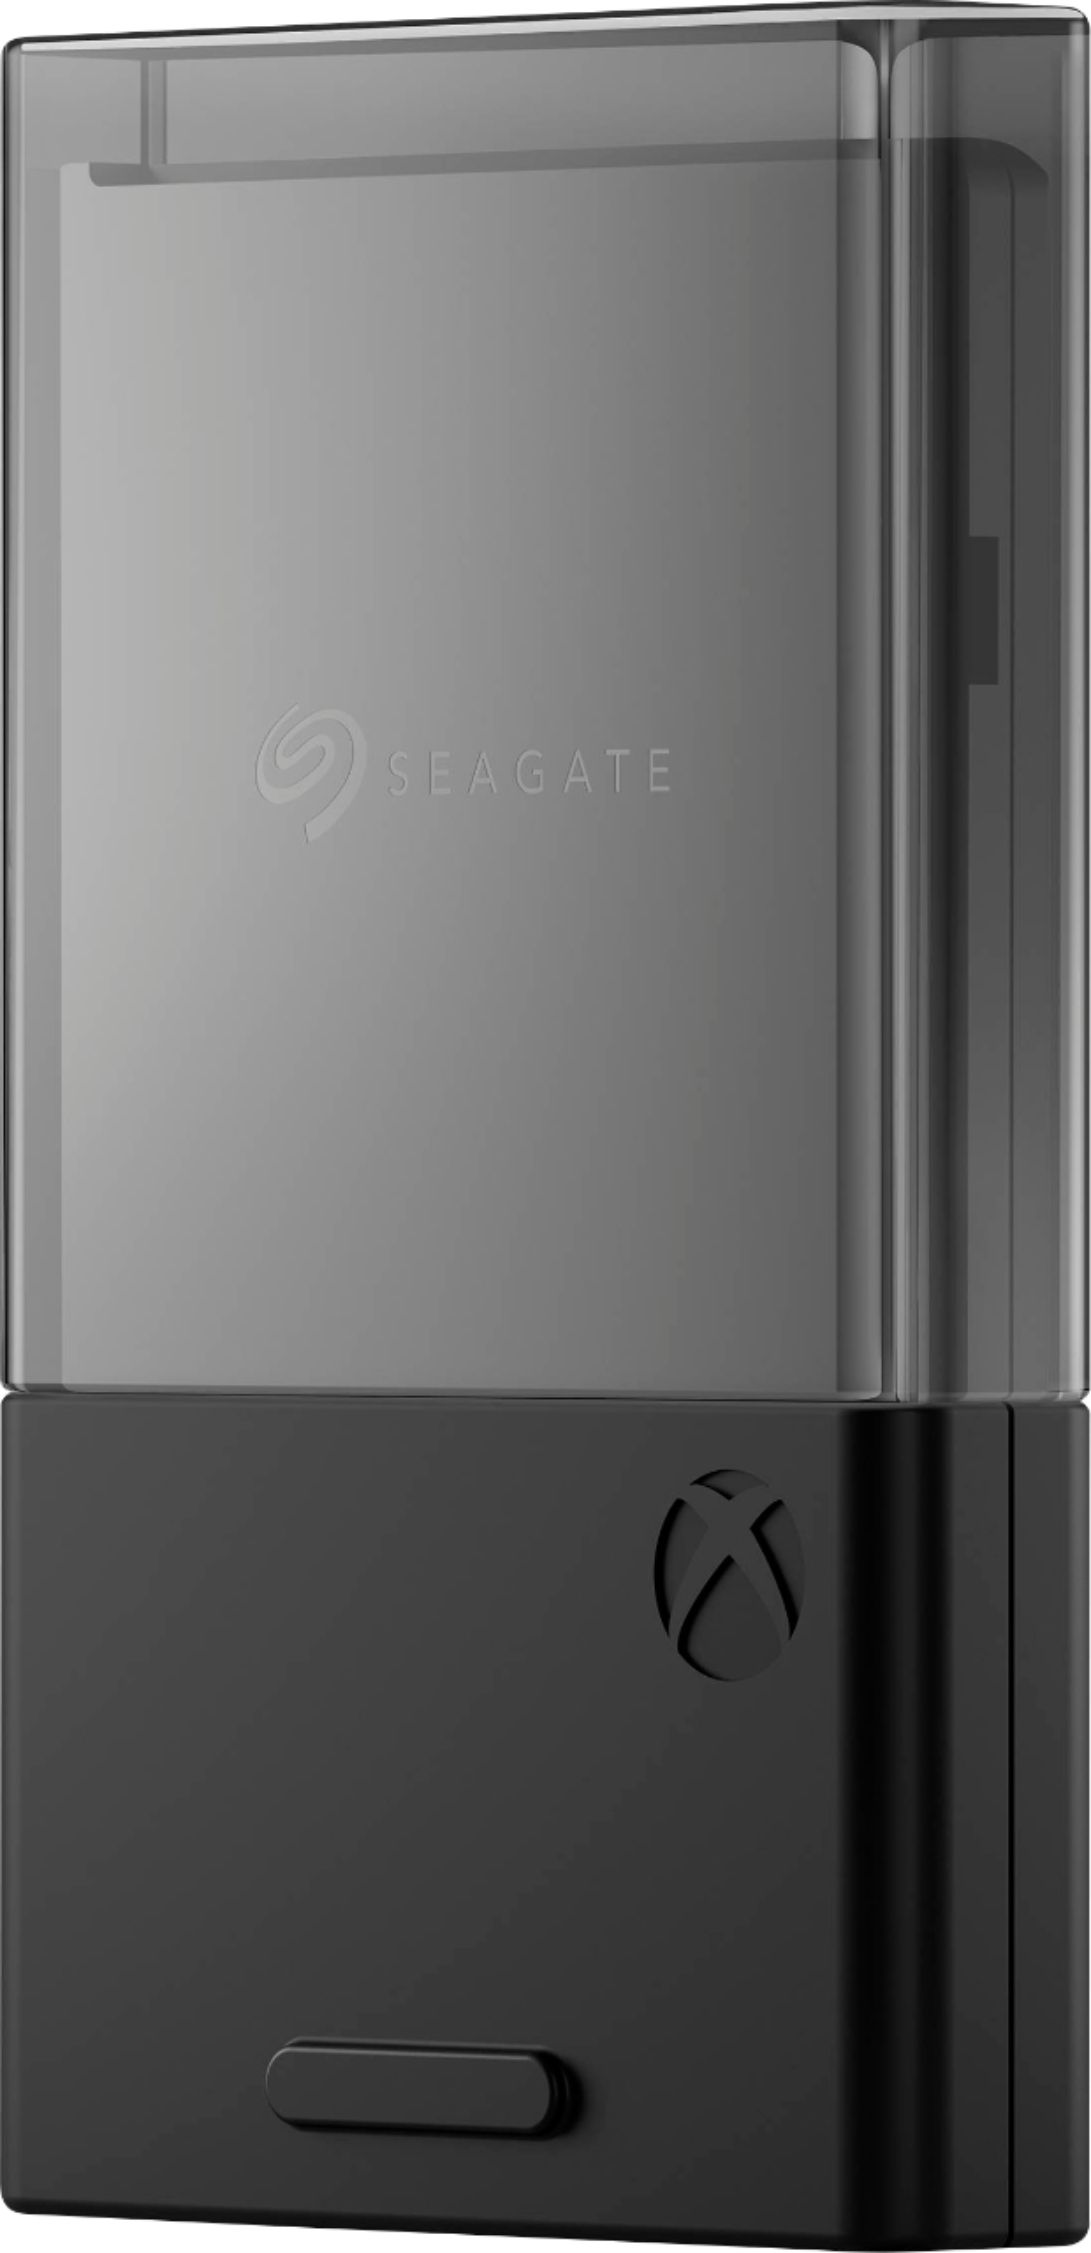 Seagate Expansion Card 1TB For XBoX Series X/S External HDD Hard Drive  Black